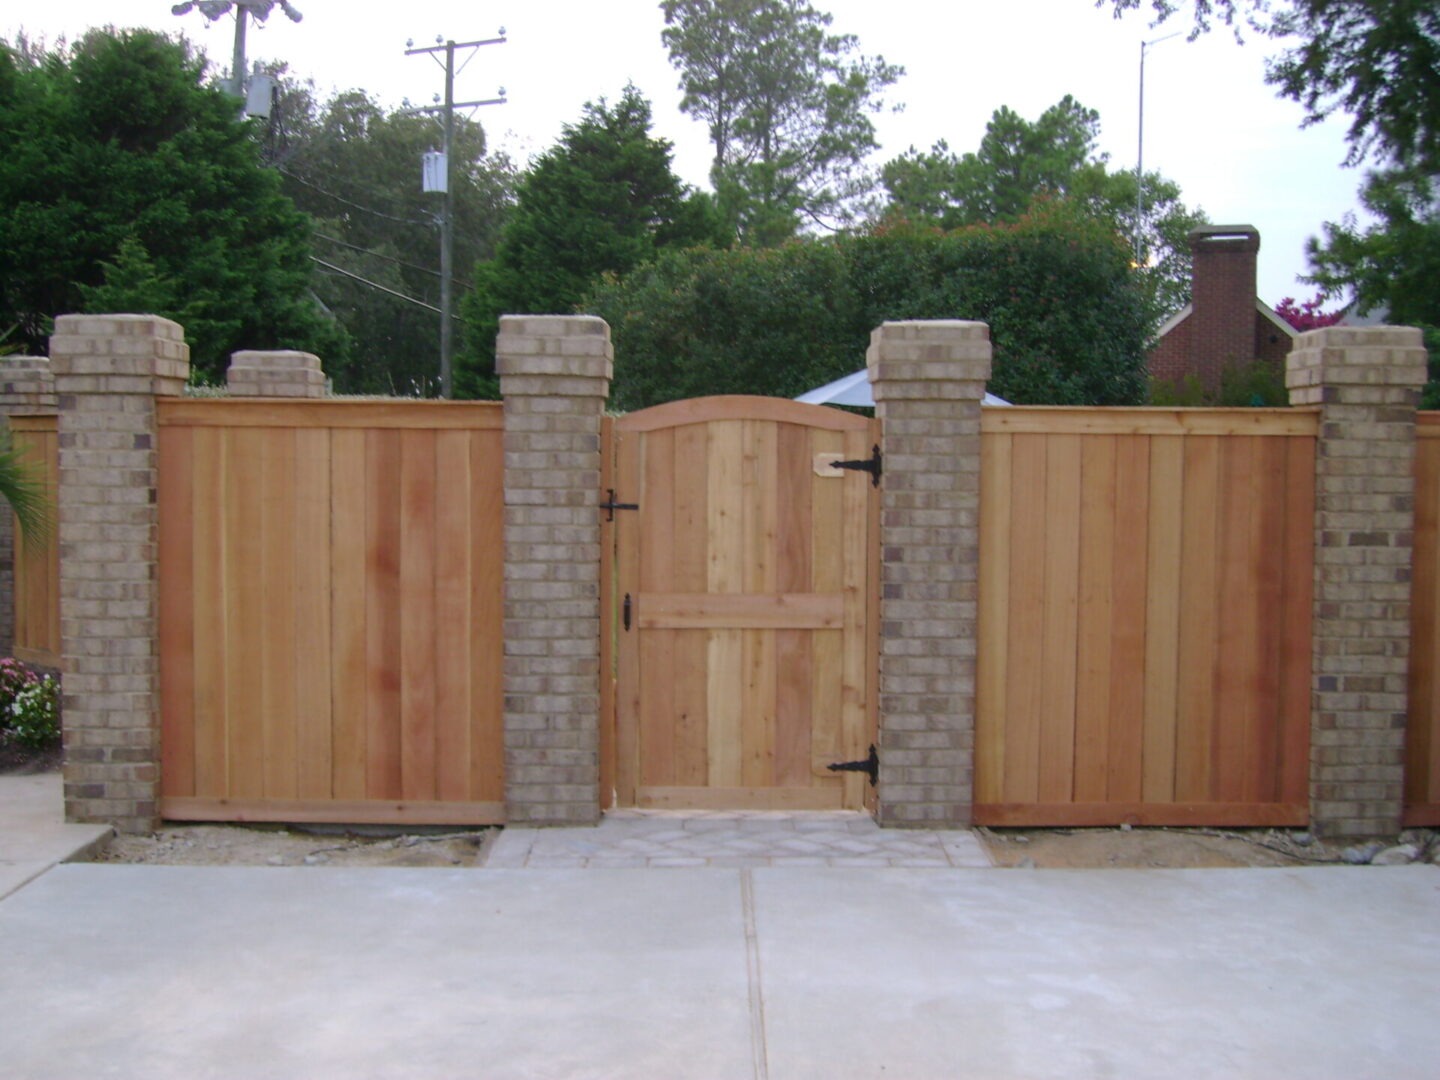 A wooden gate with brick pillars and stone posts.